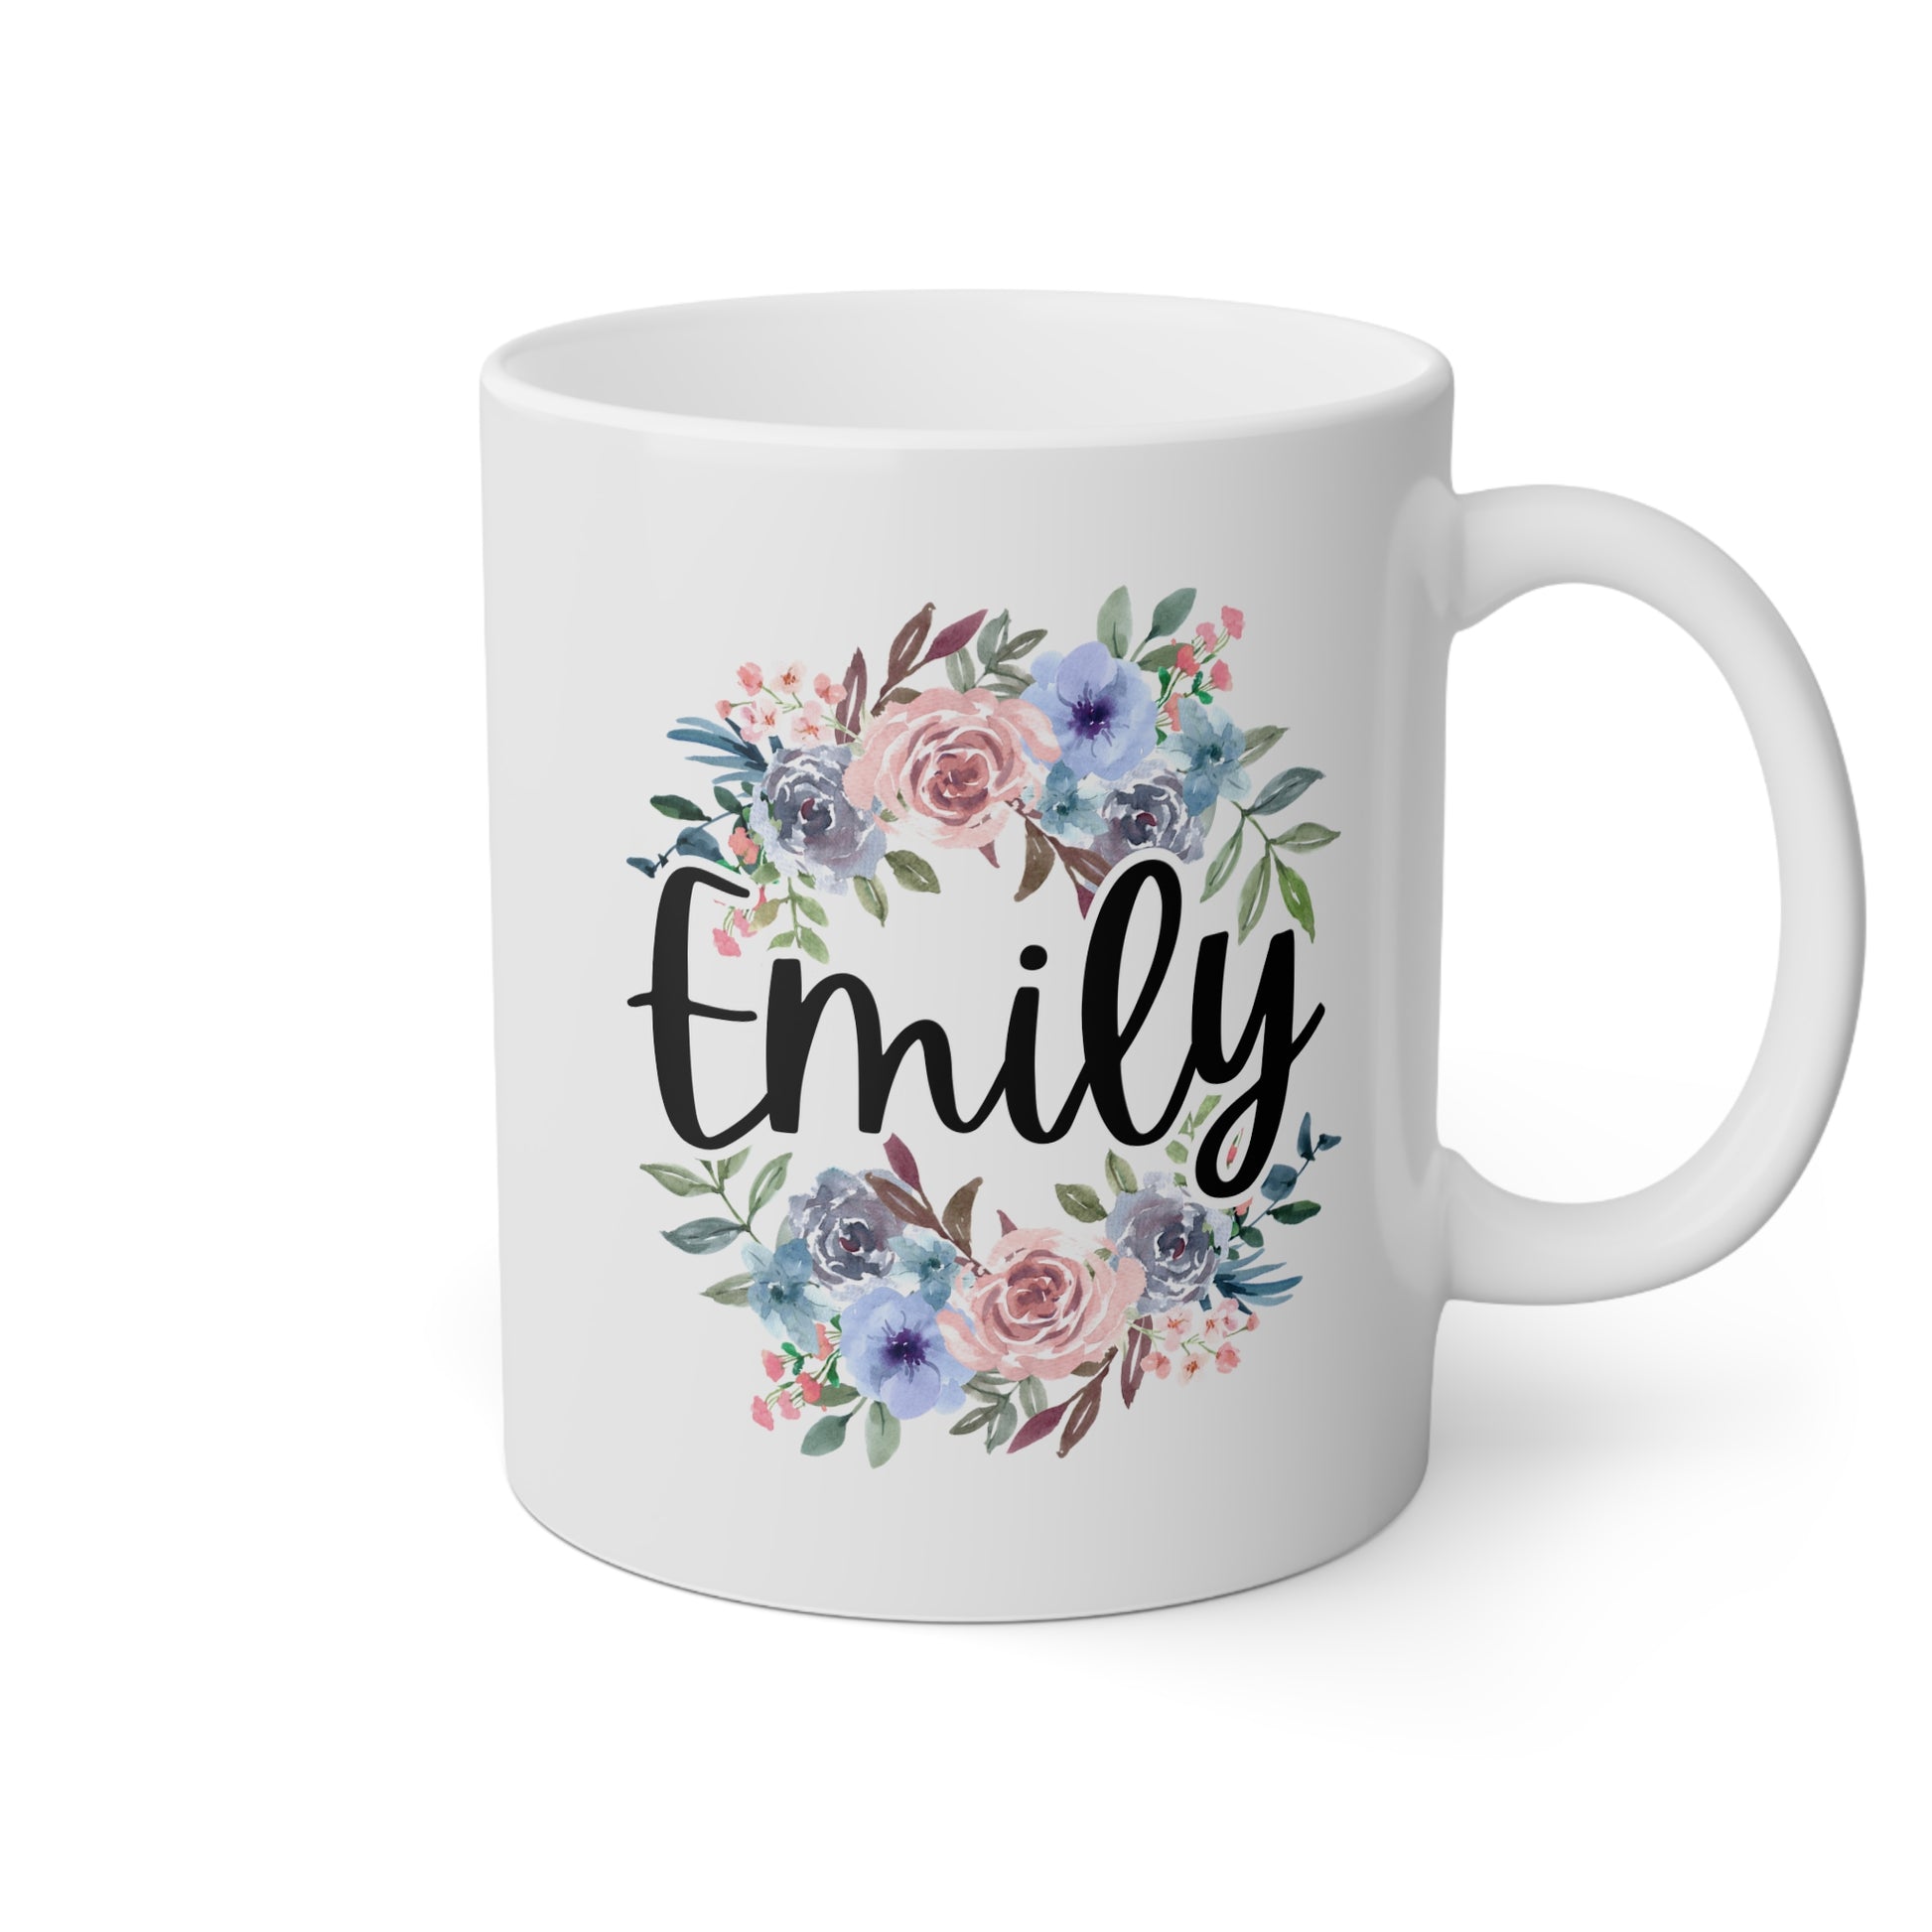 Flowers Name 11oz white funny large coffee mug gift for her floral bridesmaid christmas mothers day custom customized personalized waveywares wavey wares wavywares wavy wares